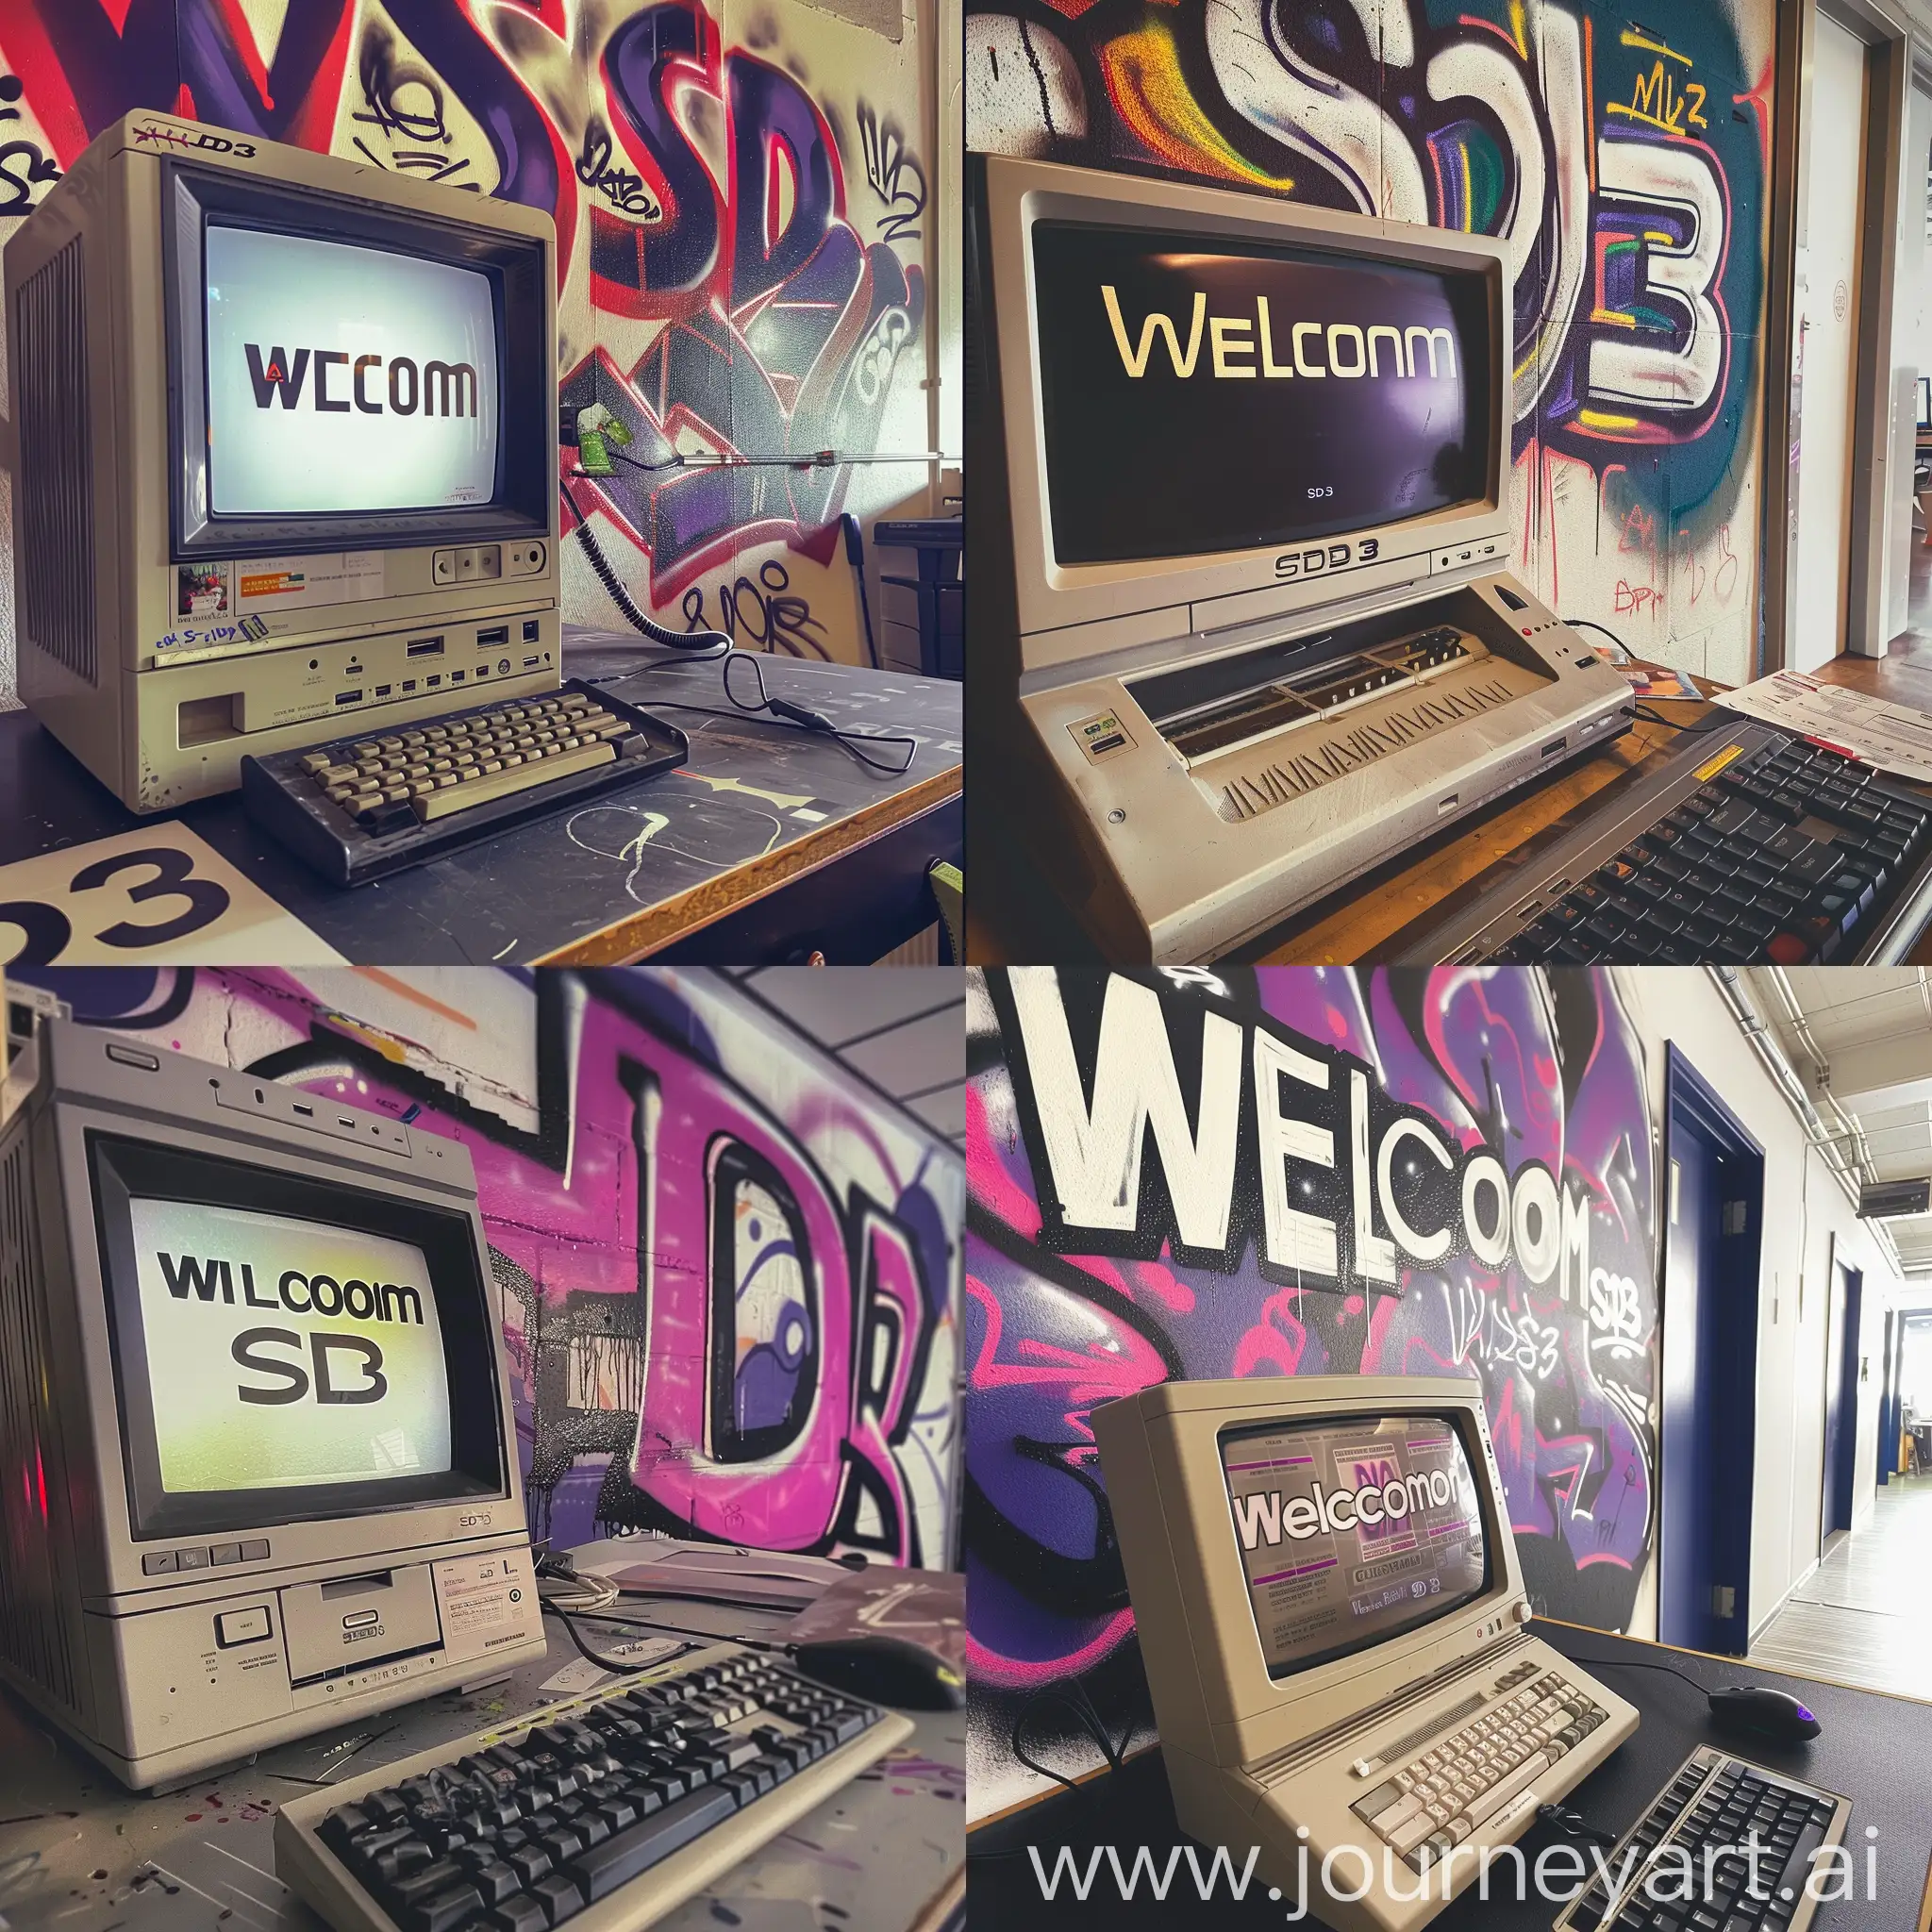 Prompt: Photo of an 90's desktop computer on a work desk, on the screen it says "welcome". On the computer wall in the background we see beautiful graffiti with the text "SD3" very large on the wall. 